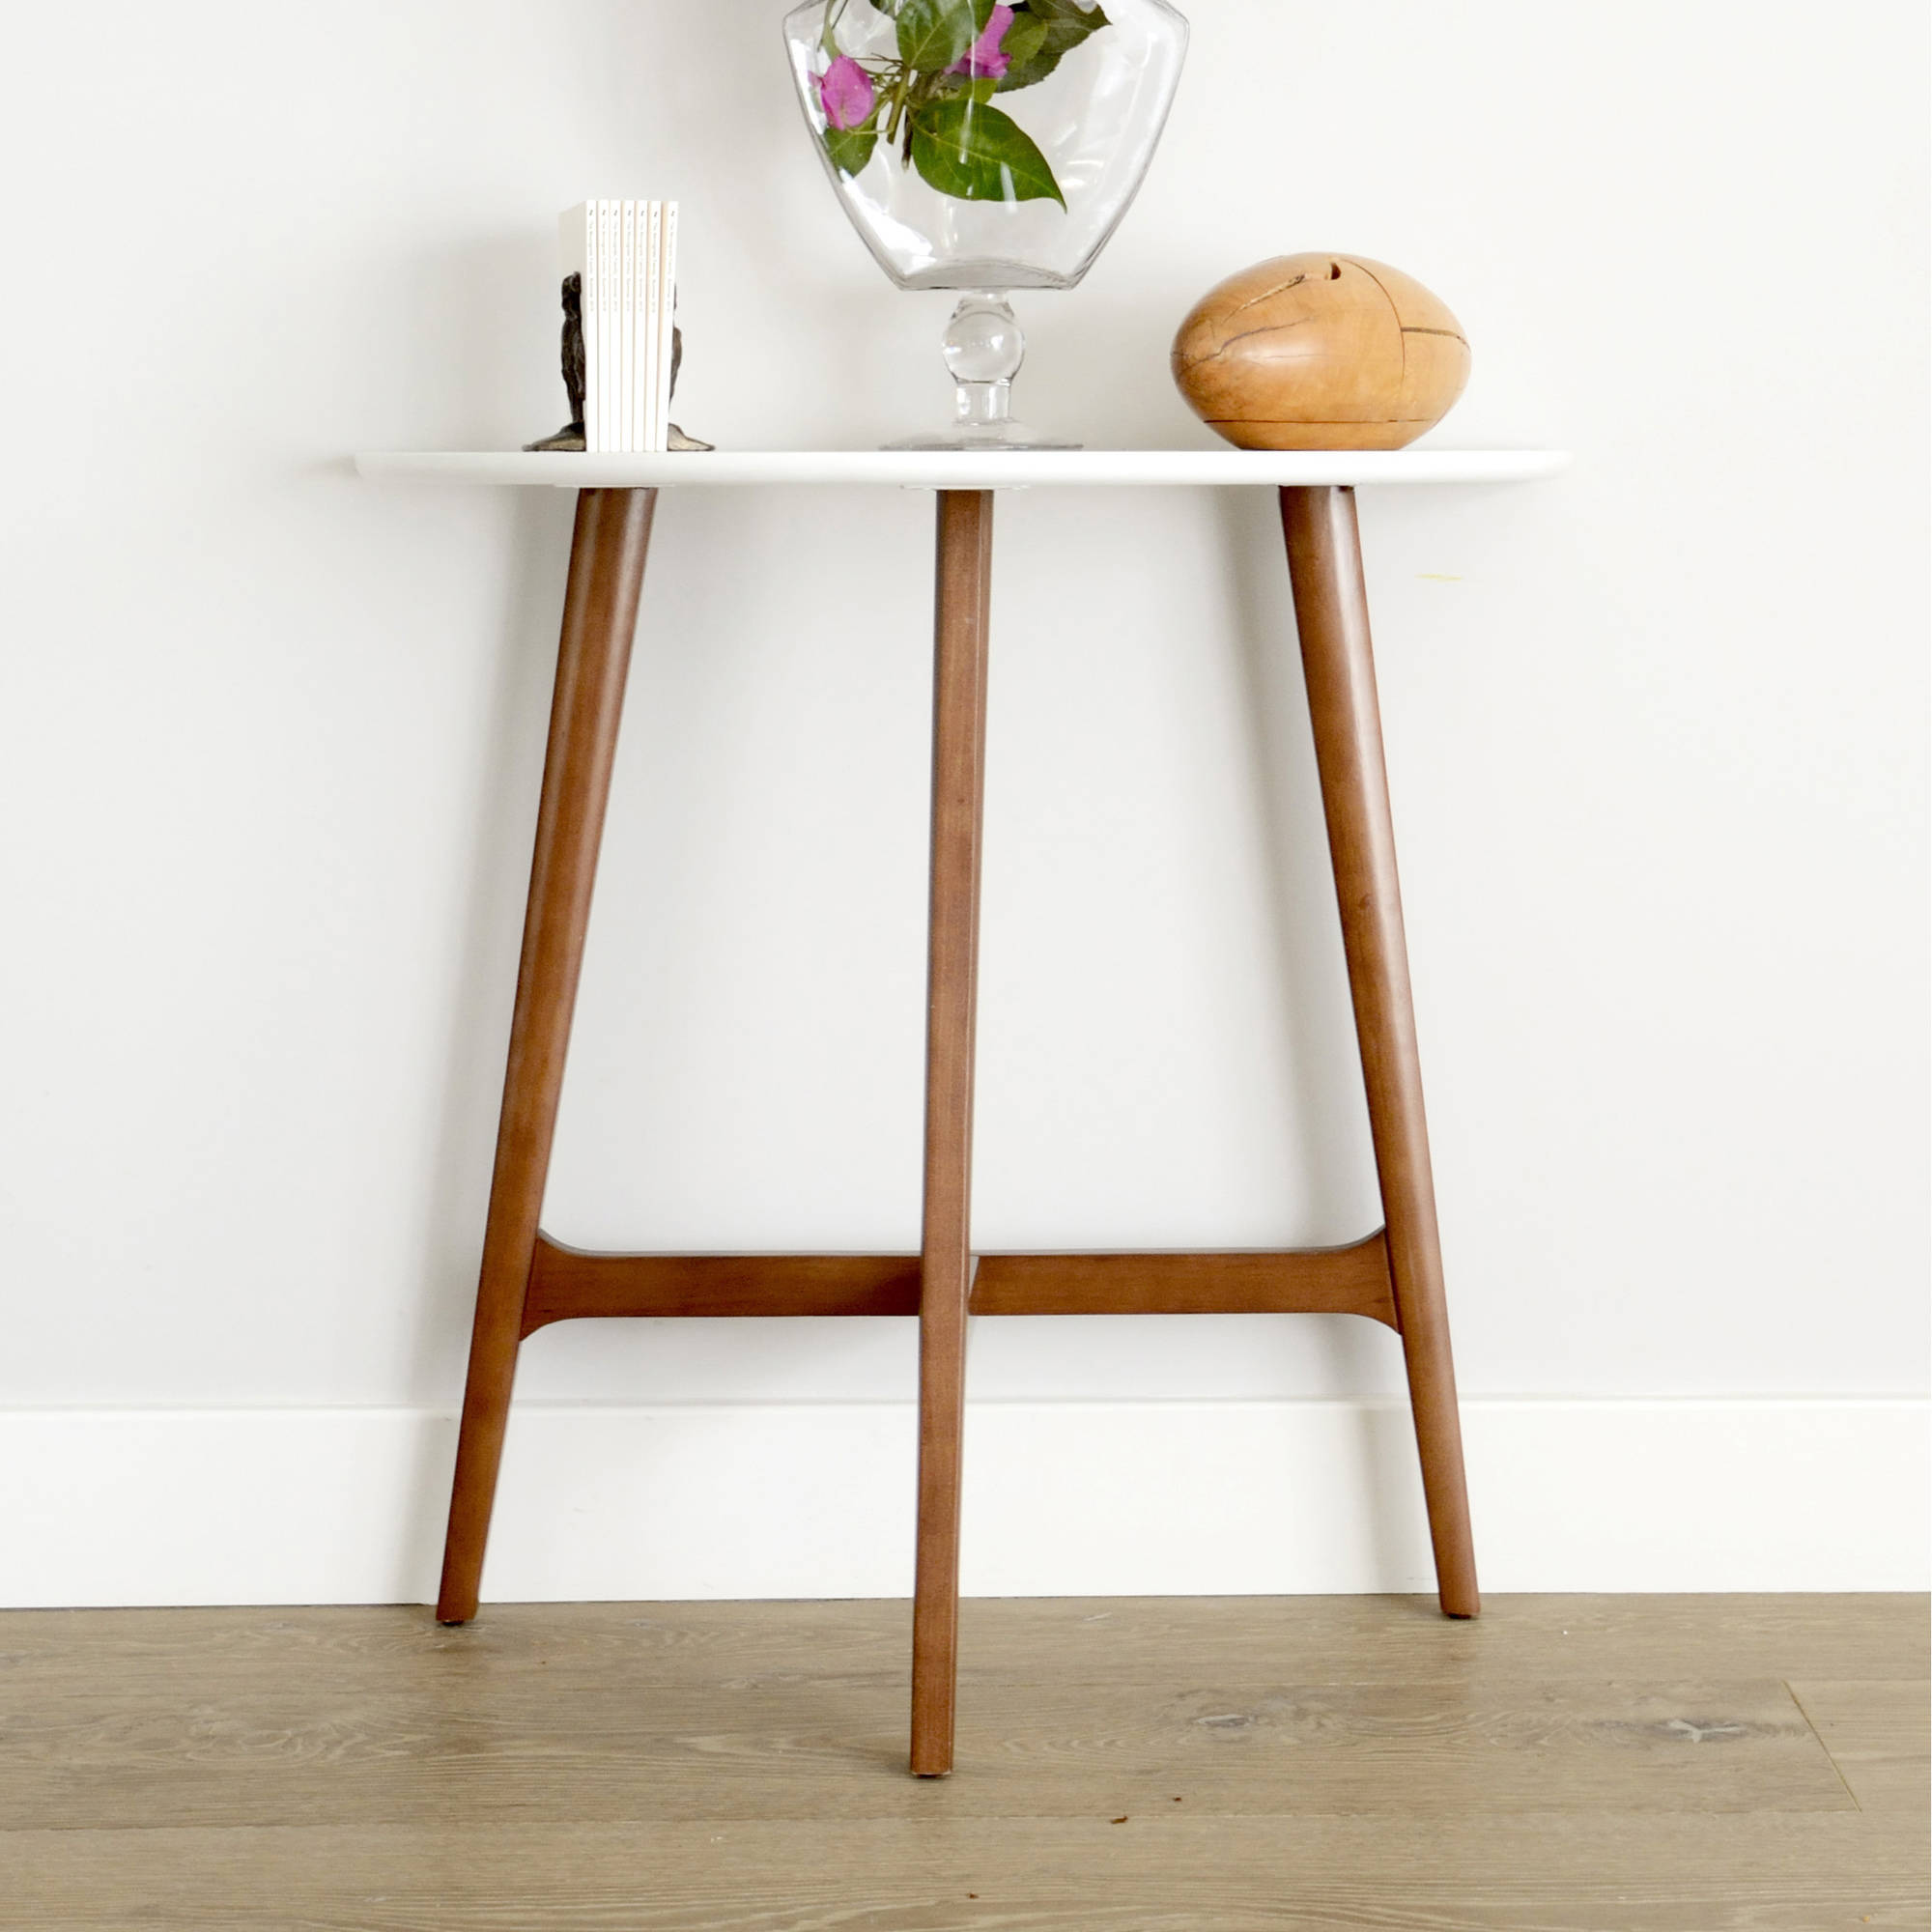 Roundabout Mid-Century Demilune End Table - image 1 of 3